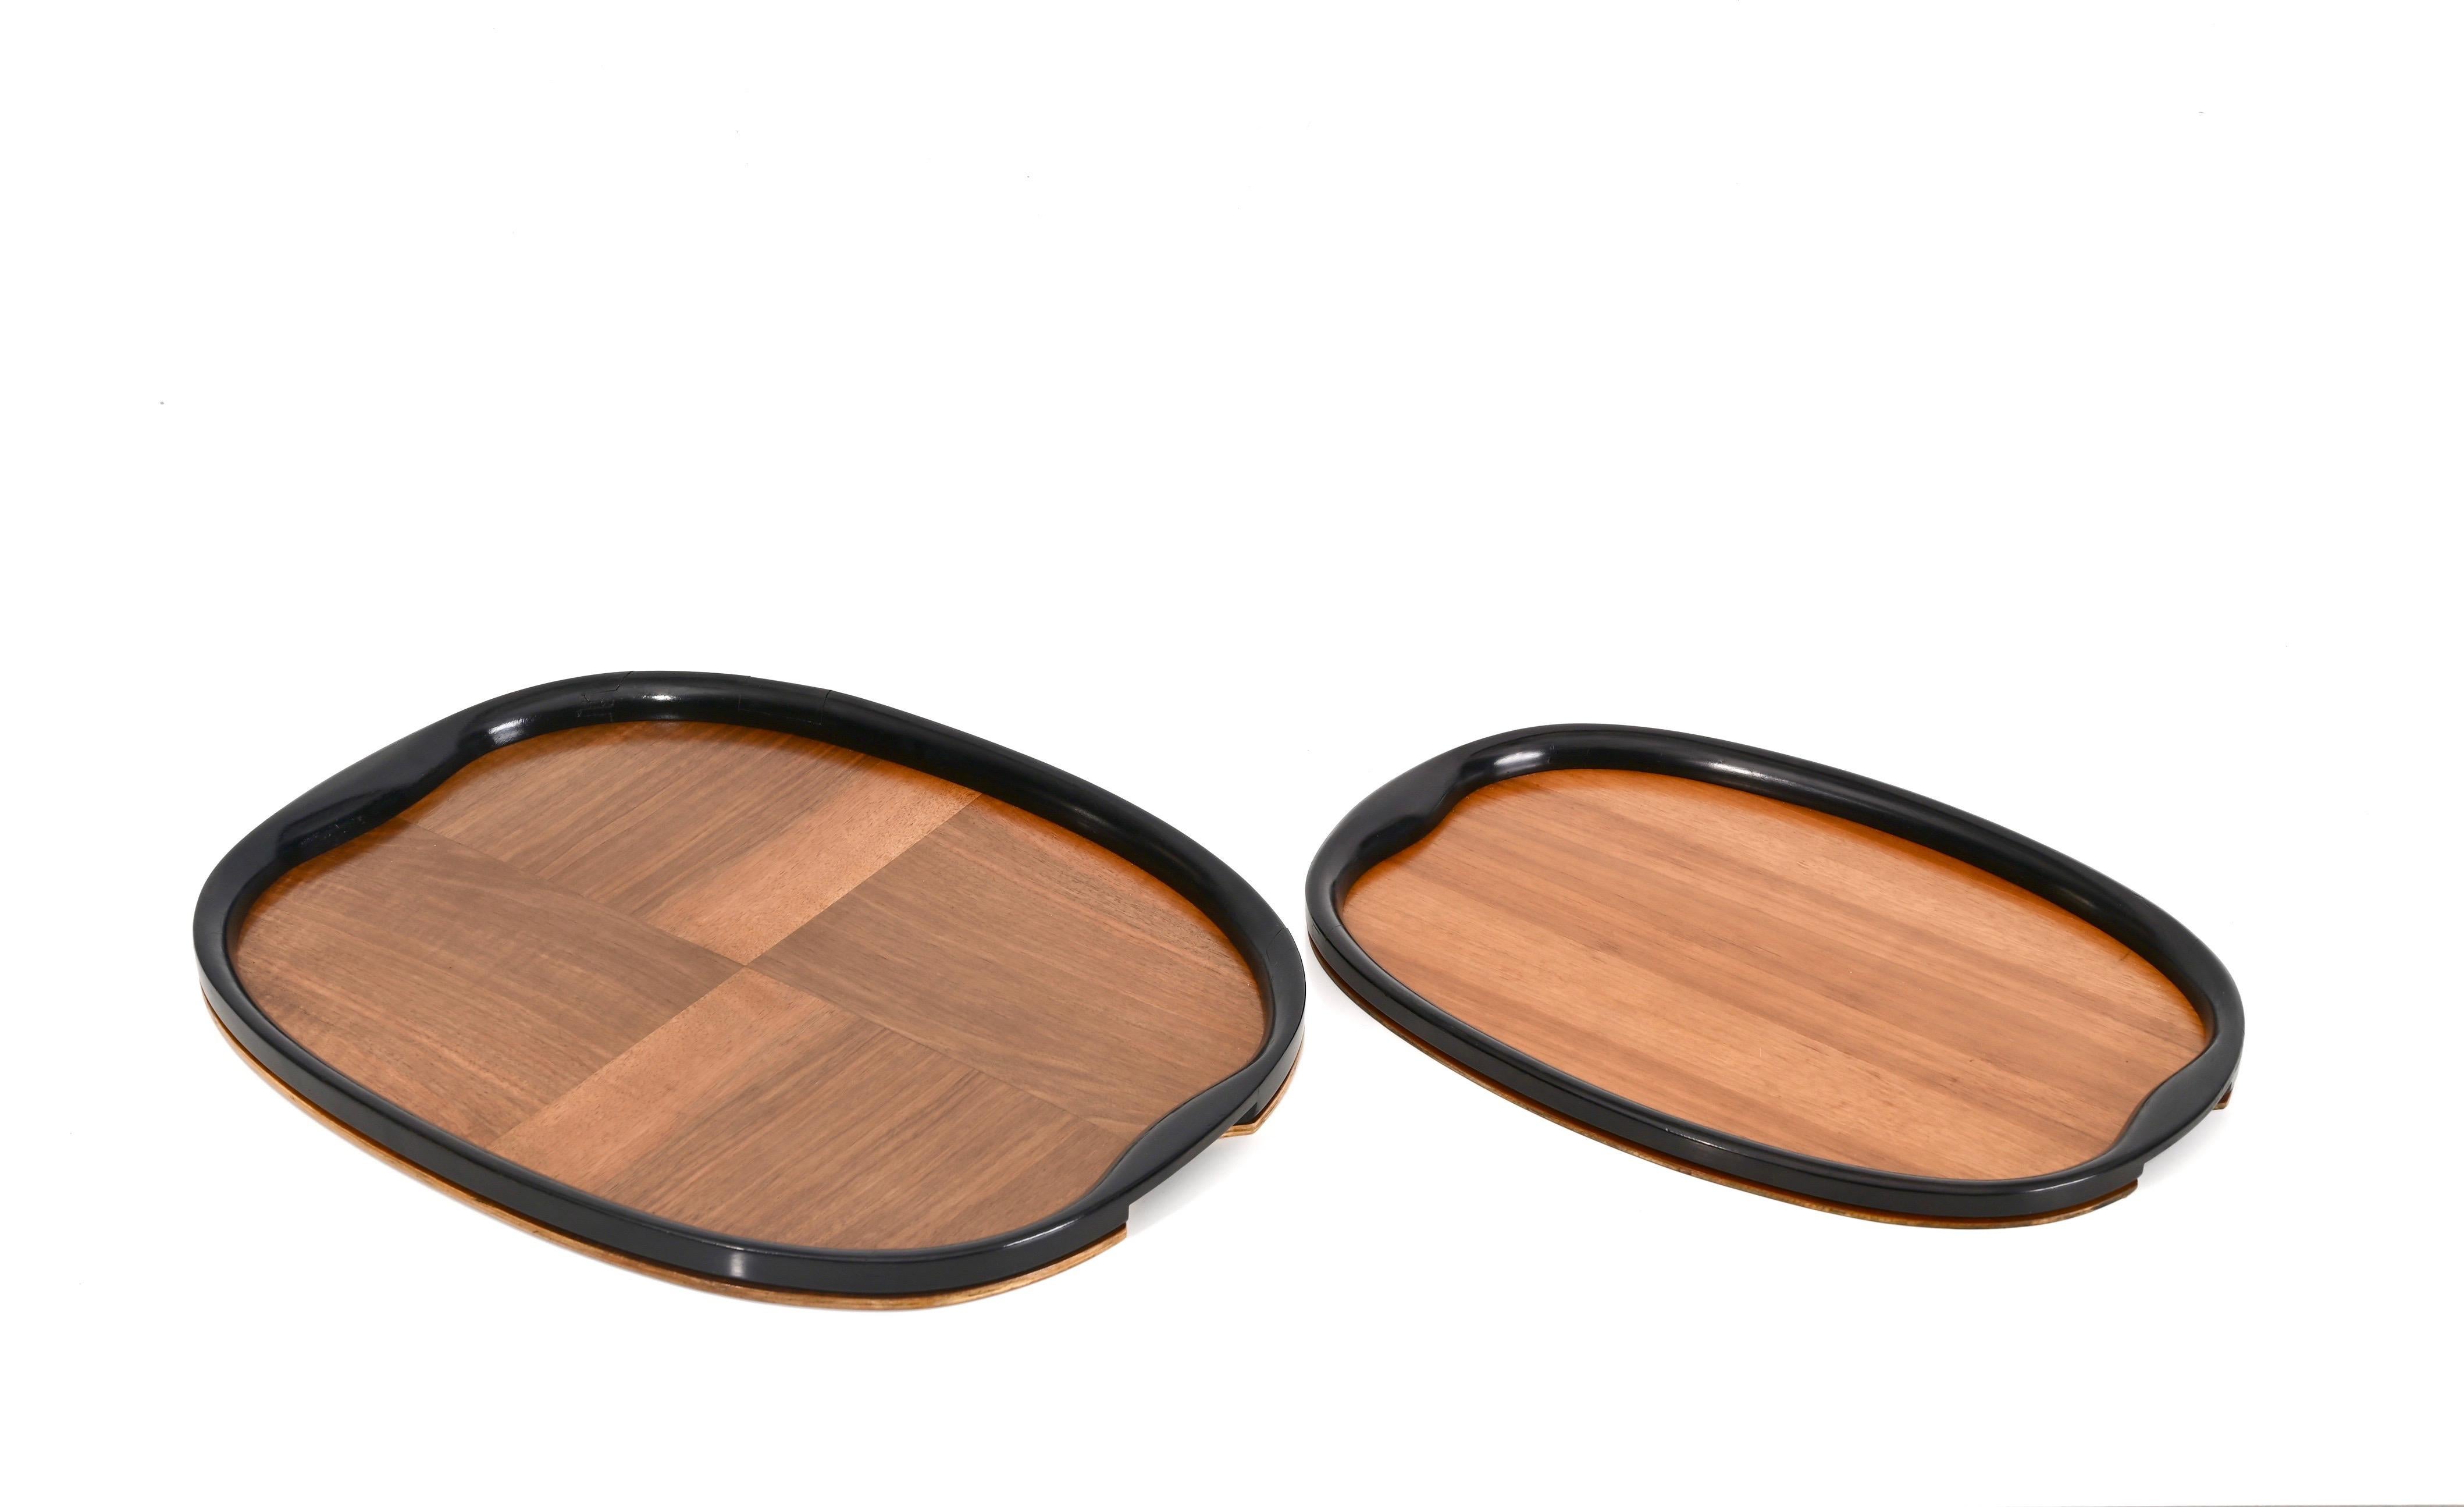 Pair of Art Deco Serving Trays, Ebonized Wood and Walnut, Italy, 1940s For Sale 12